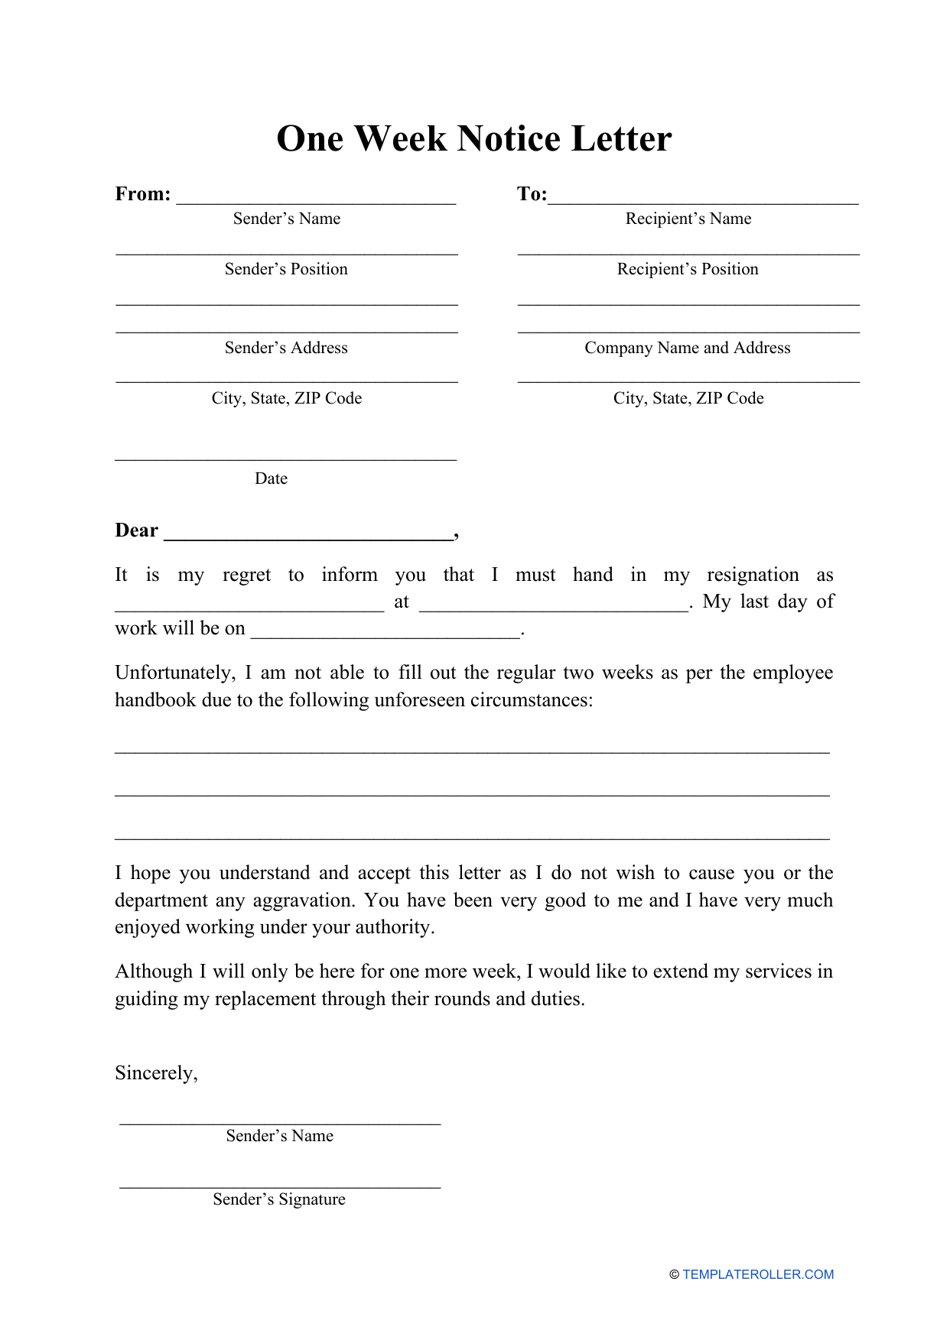 One Week Notice Letter Template Preview